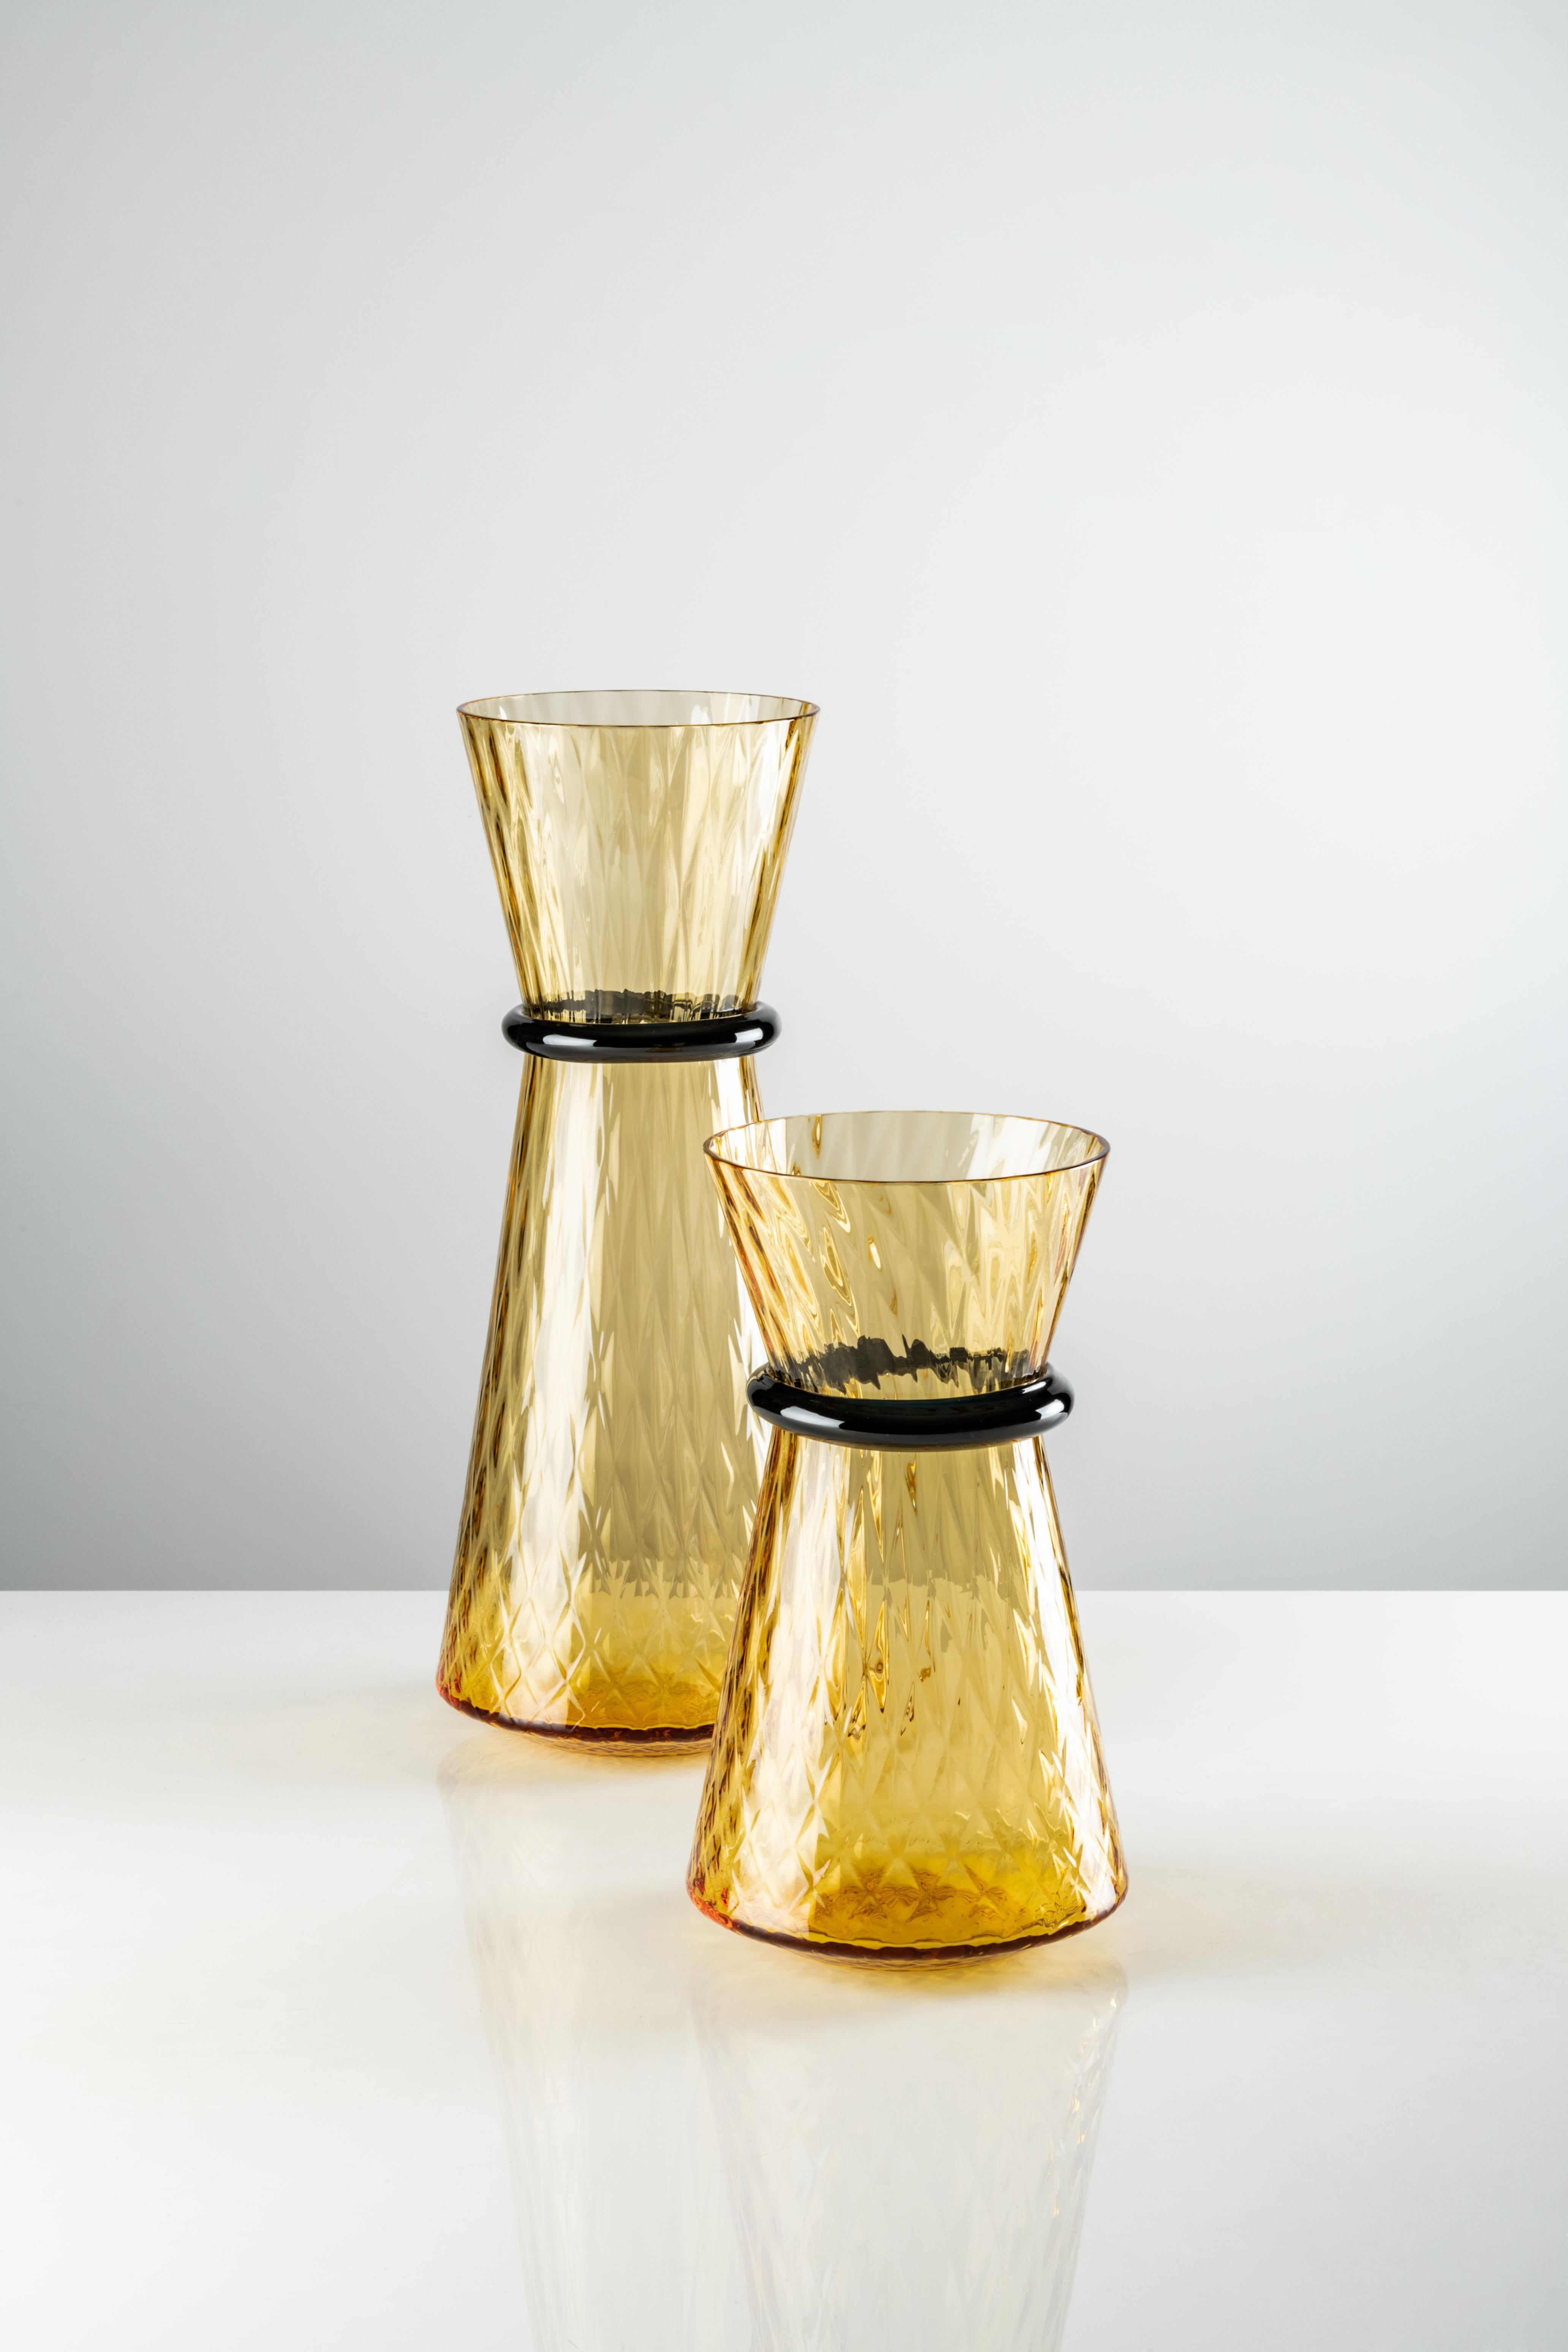 Tiara large vase in amber and horizon Murano glass by Francesco Lucchese for Venini. The art of glassmaking meets the endless potential of light. A jewel-like creation that carries an infinite sparkle, precious like gemstones. Francesco Lucchese